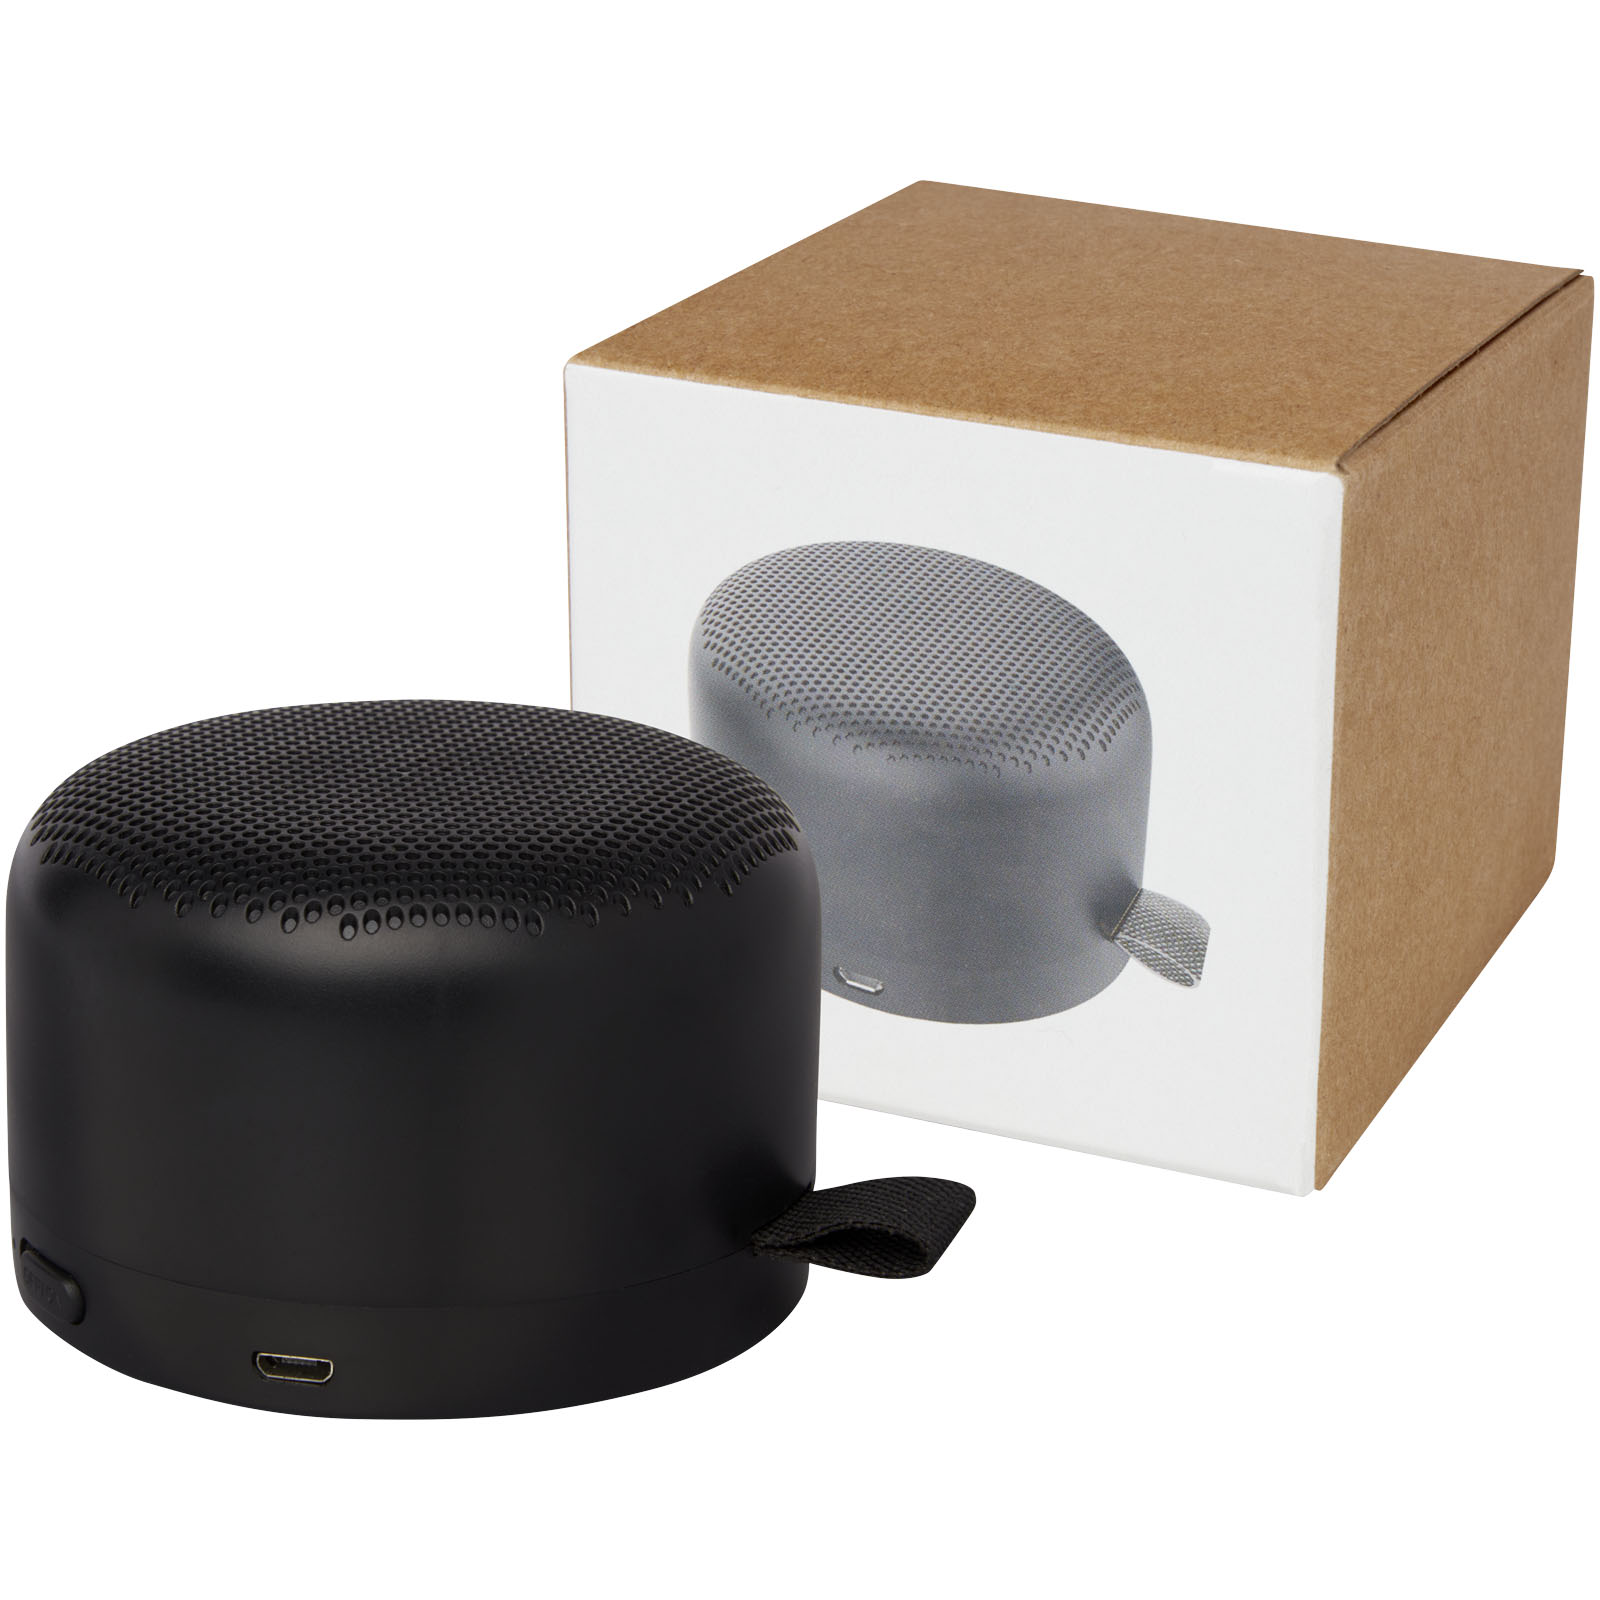 Plastic wireless speaker DABLAC made of recycled plastic, 5 W - solid black